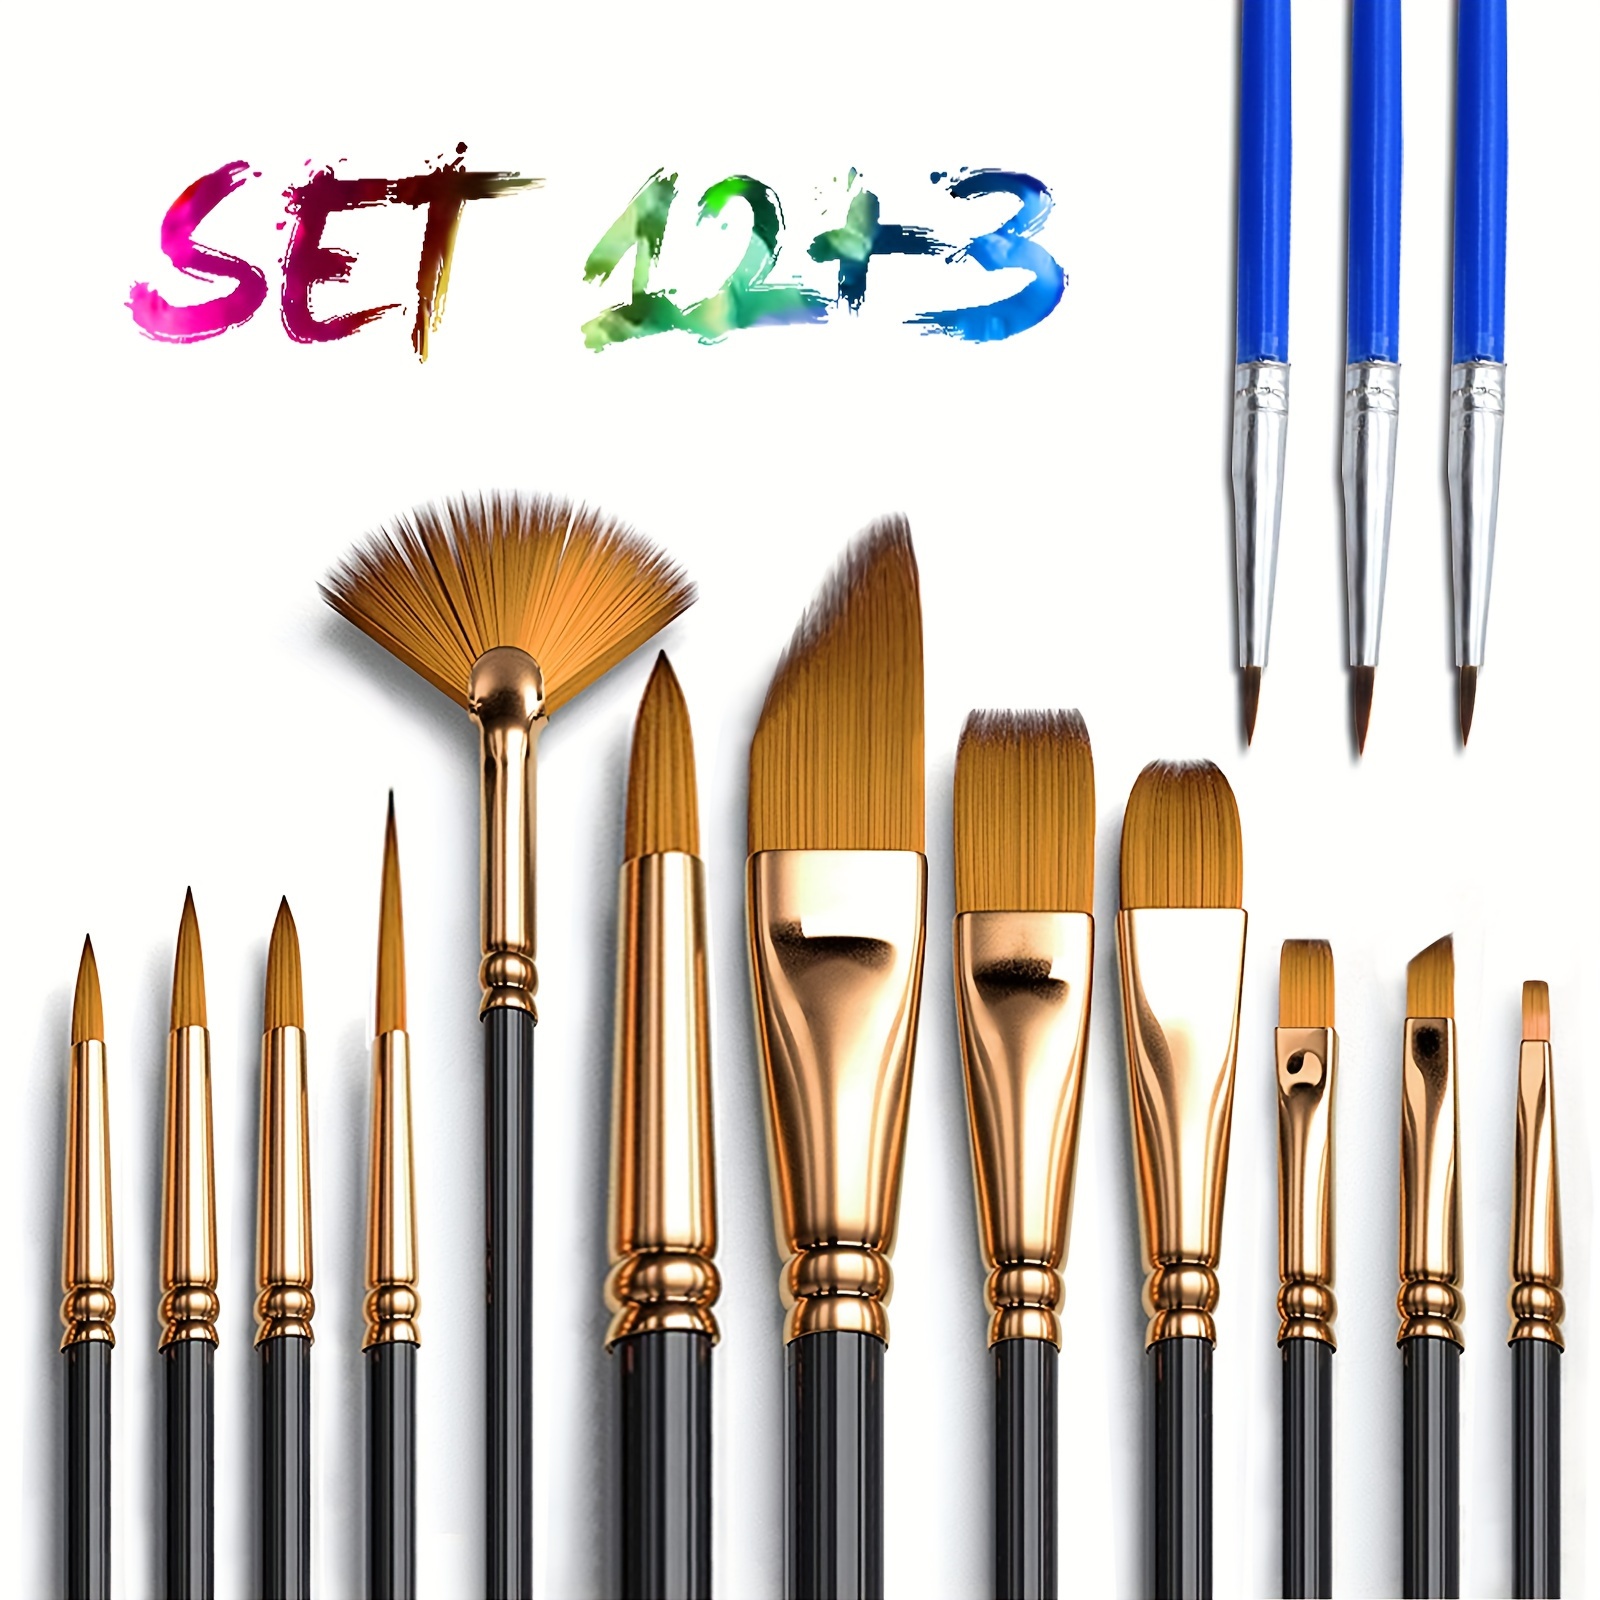 Paint Brushes Set, 20 Pcs Paint Brushes for Acrylic Painting, Oil  Watercolor Acrylic Paint Brush, Artist Paintbrushes for Body Face Rock  Canvas, Kids Adult Drawing Arts Crafts Supplies, Blue+Pink